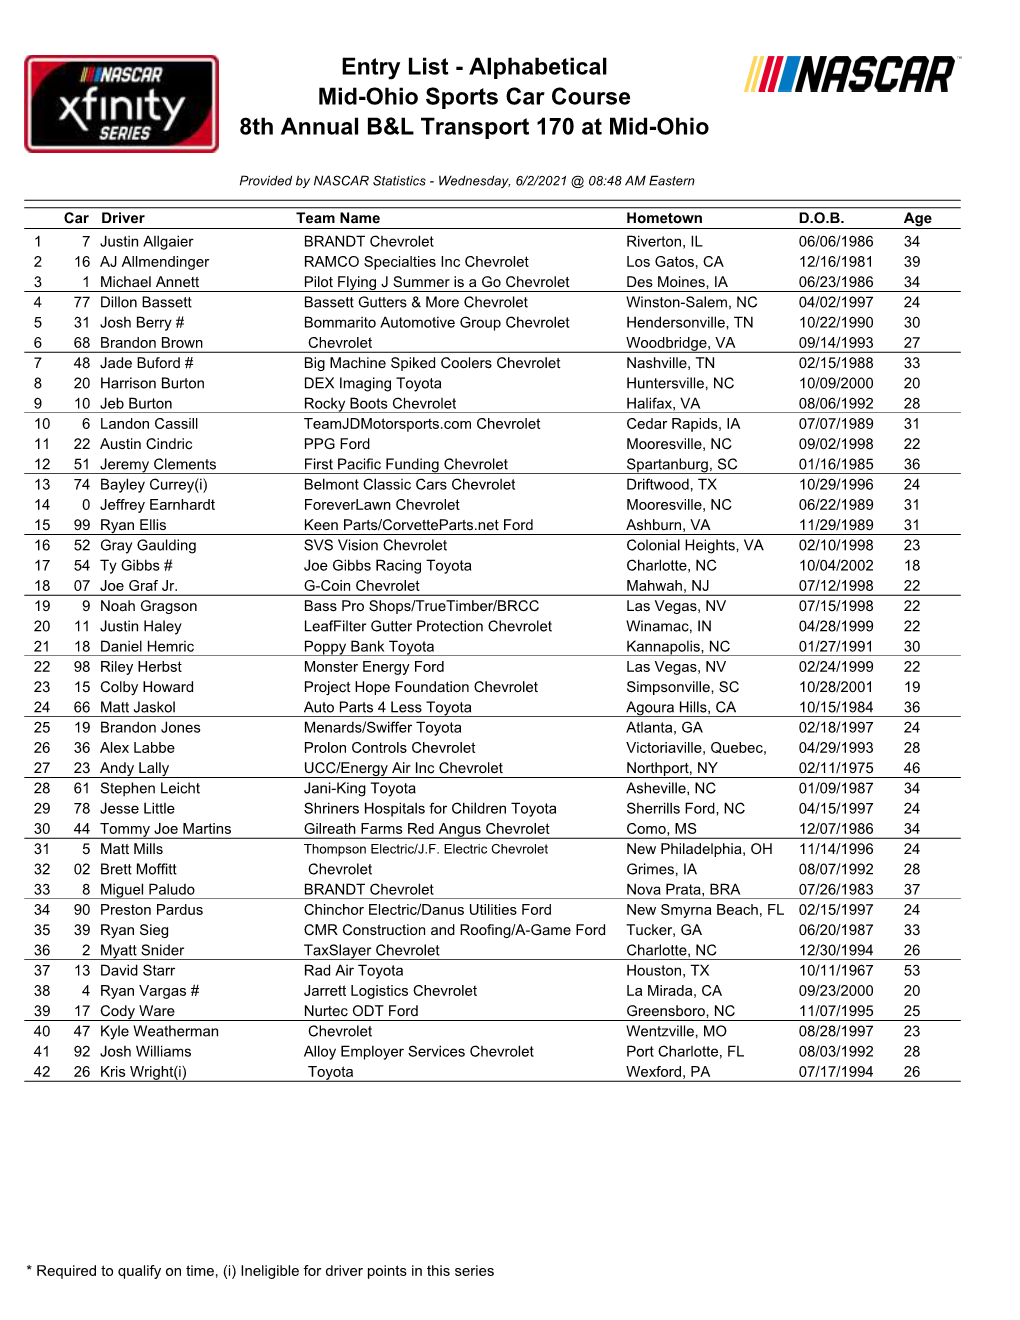 Entry List - Alphabetical Mid-Ohio Sports Car Course 8Th Annual B&L Transport 170 at Mid-Ohio